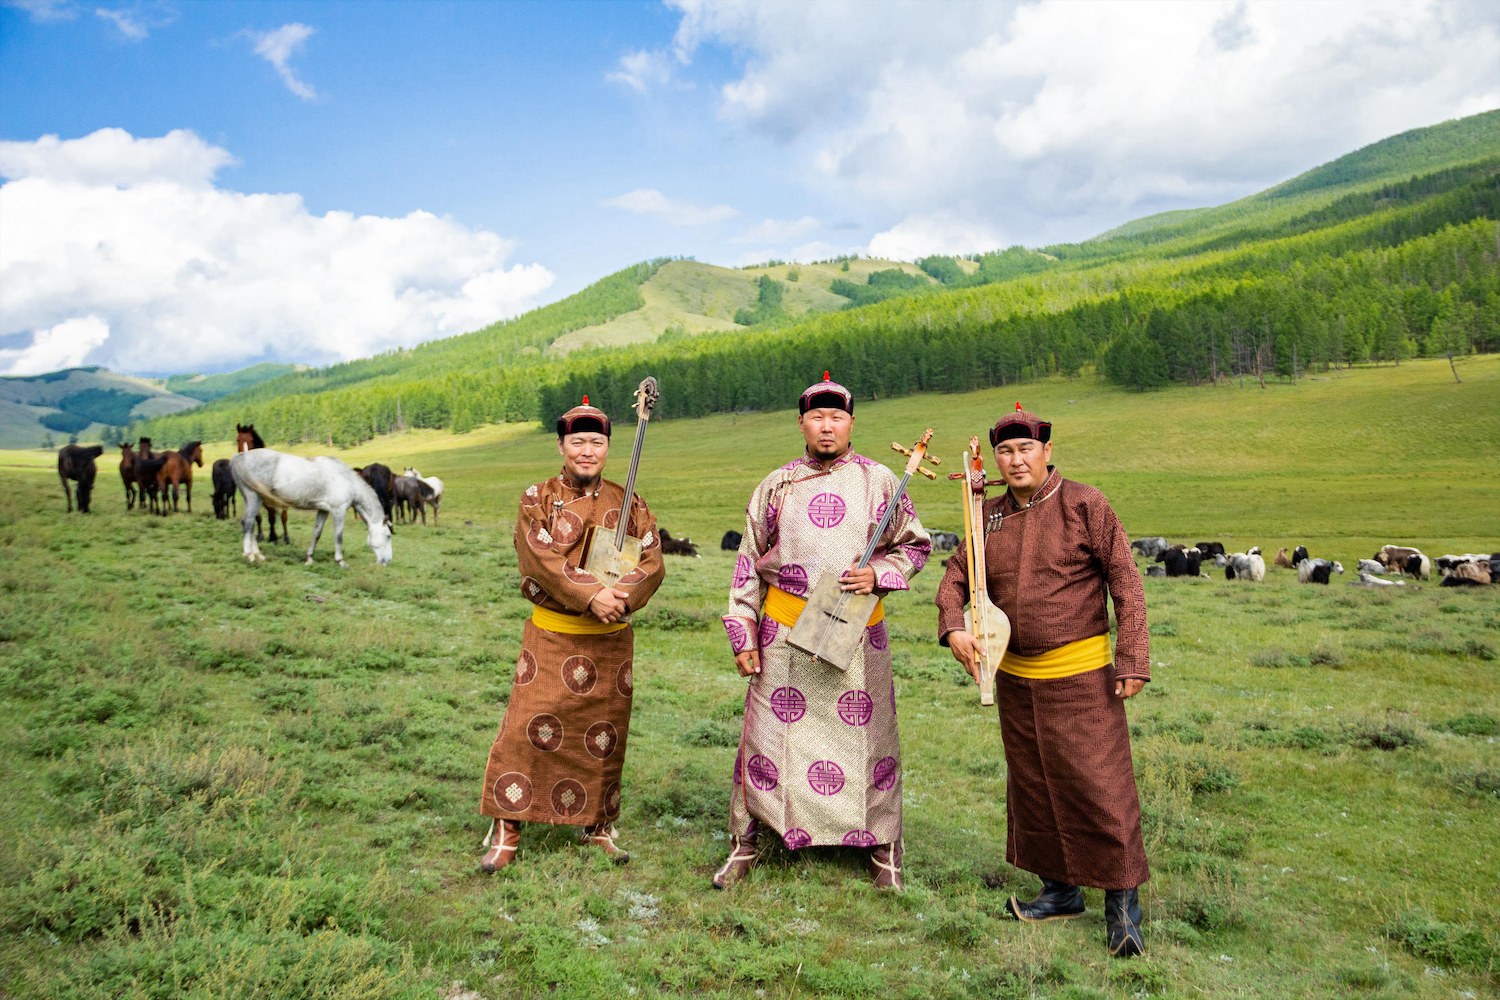 Three Tuvan men, the members of Alash, stand in a green field holding instruments. Horses graze in the background.